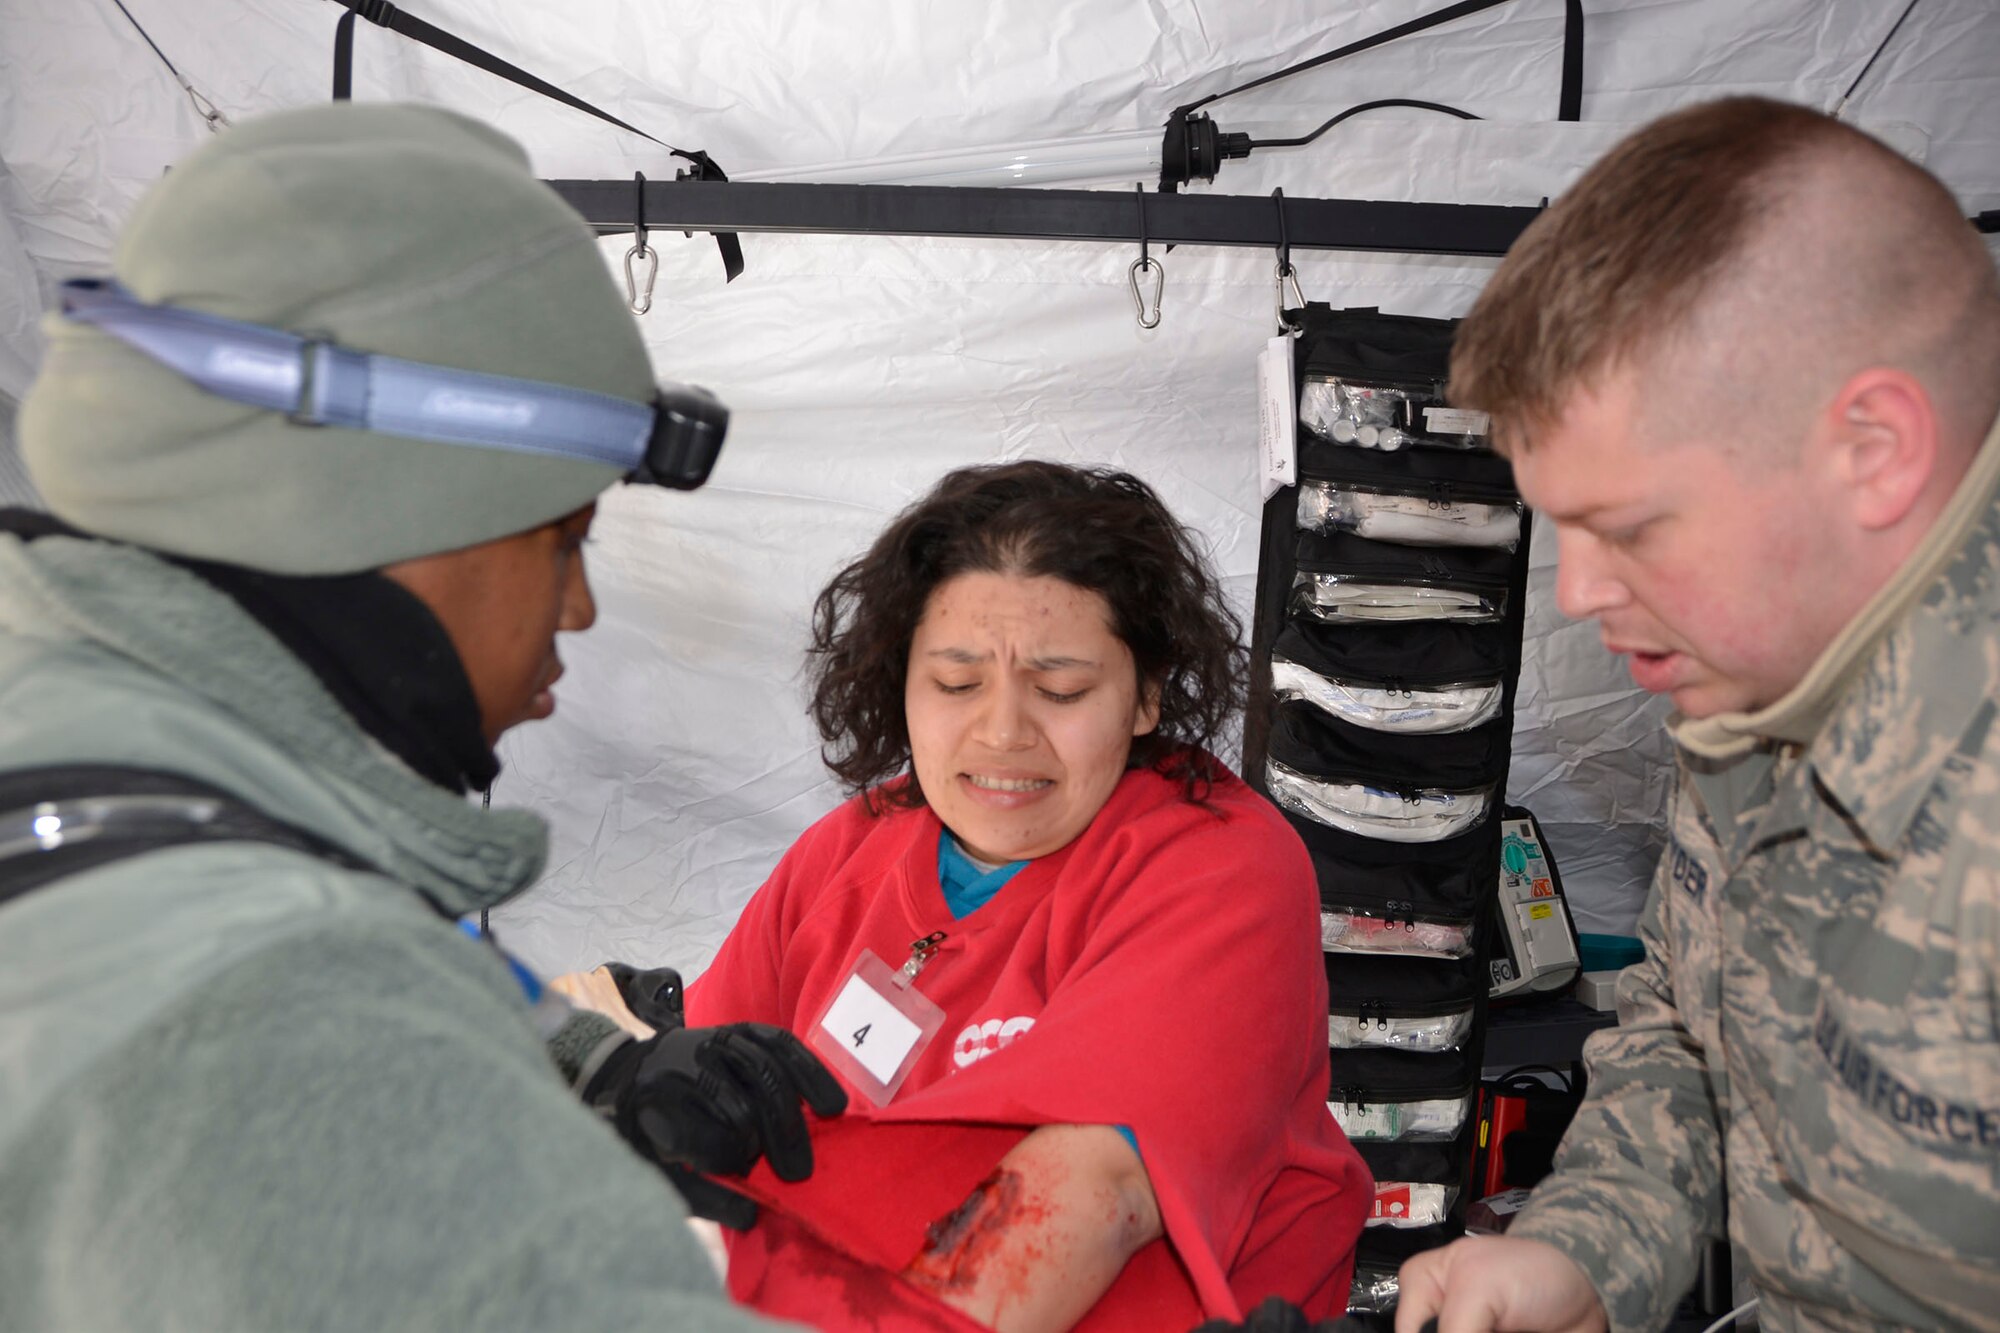 Staff Sgt. Khaliha Love and Senior Airman Glen Snyder, from the 81st Medical Group medics, treat a simulated patient during the Expeditionary Medical Support field confirmation exercise at Camp Atterbury, Indiana, April 17, 2018. The confirmation exercise evaluated the tactics, techniques and procedures of EMEDS operations during a domestic U.S. contingency such as a natural disaster. (U.S. Air Force photo by Mary McHale)